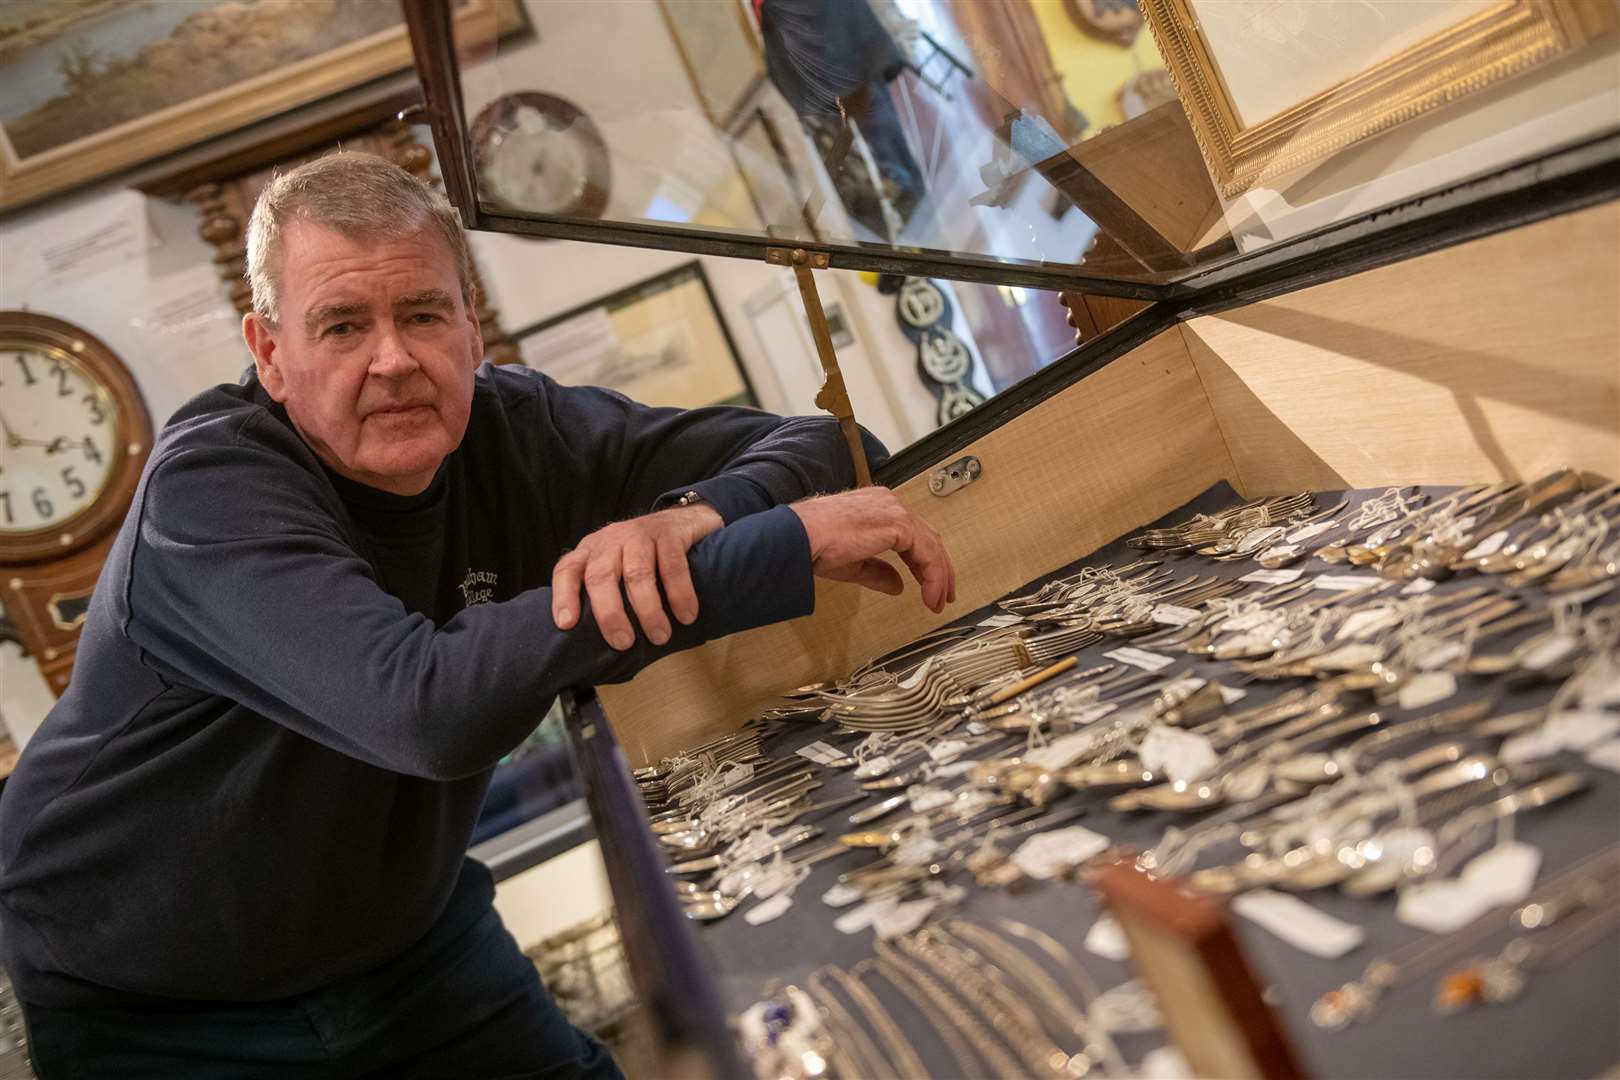 Bill Powrie said the thief took jewellery from one of his display cases. Picture: Callum Mackay.